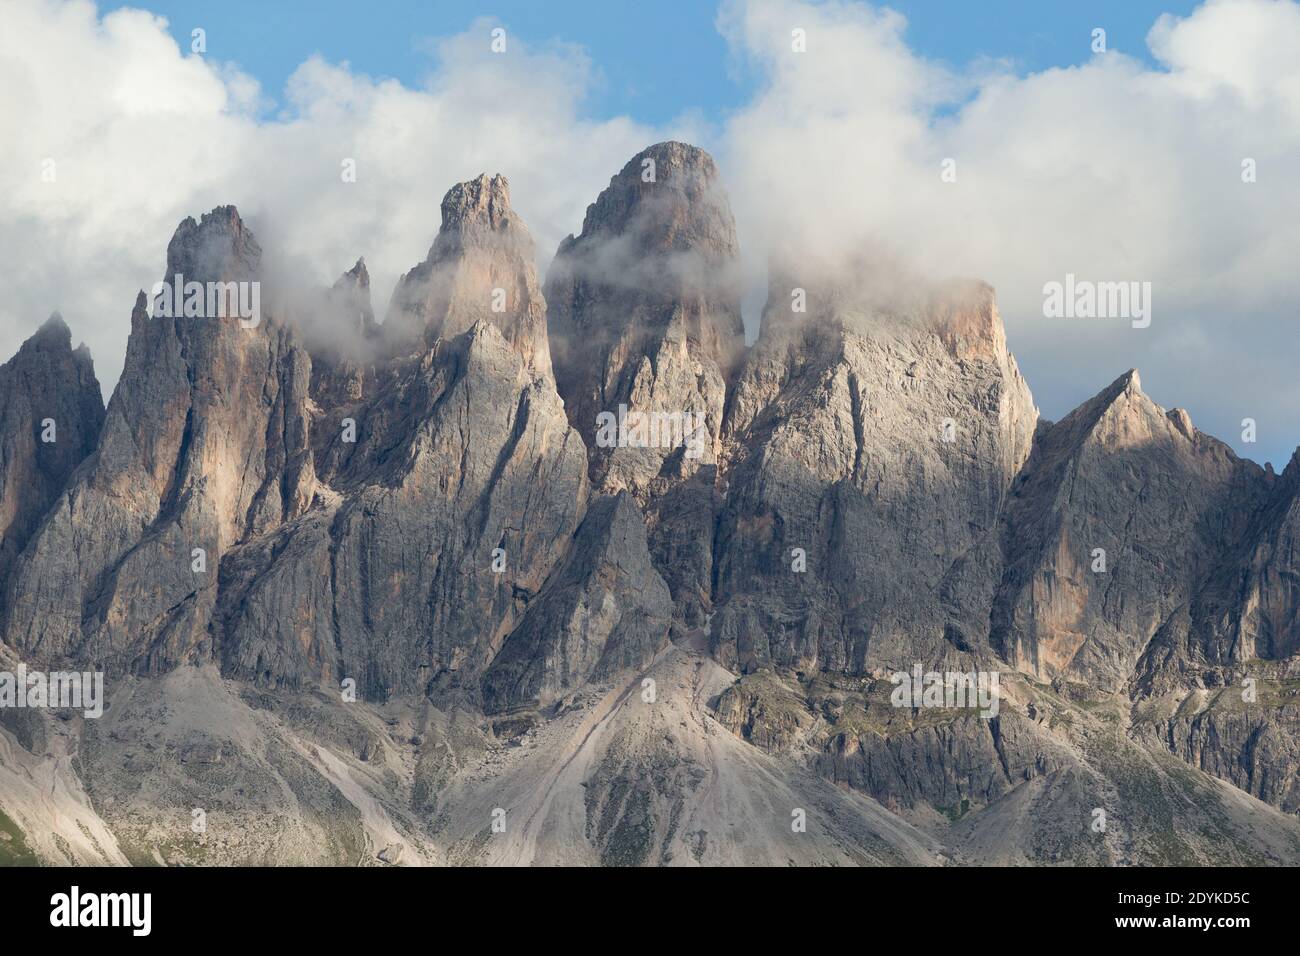 The Odle Mountain Peaks  of The Dolomites Stock Photo